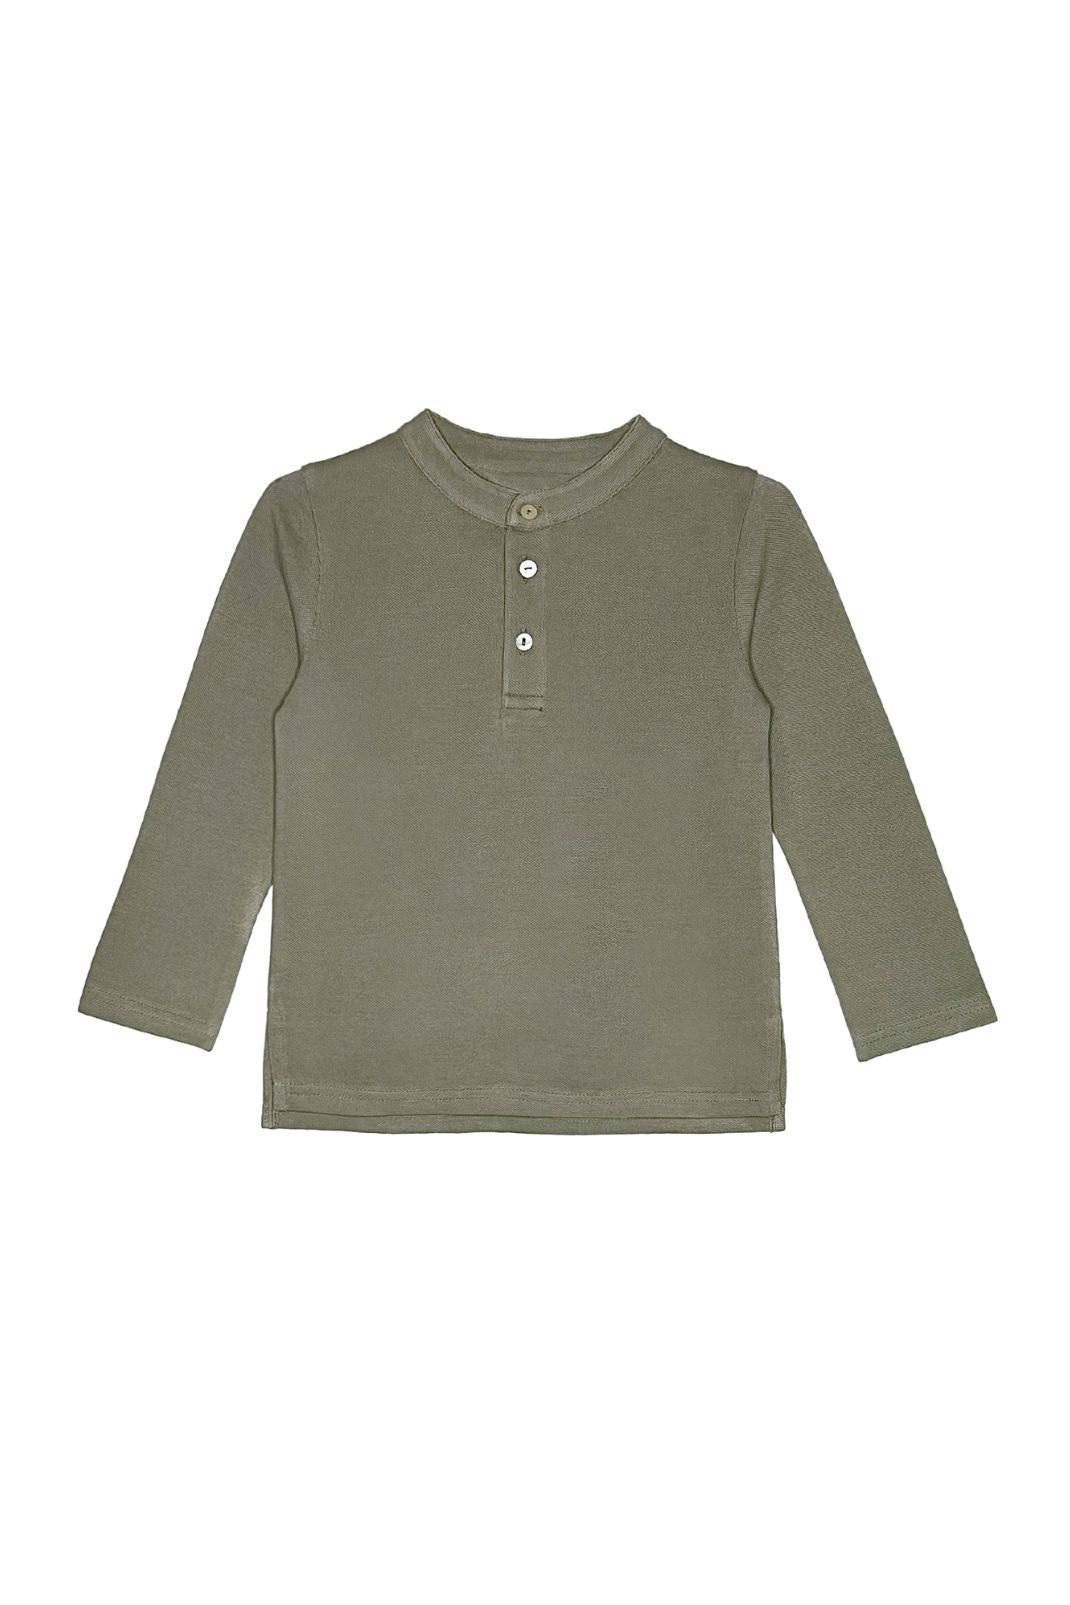 Product image of the Douglas Top in Vetiver